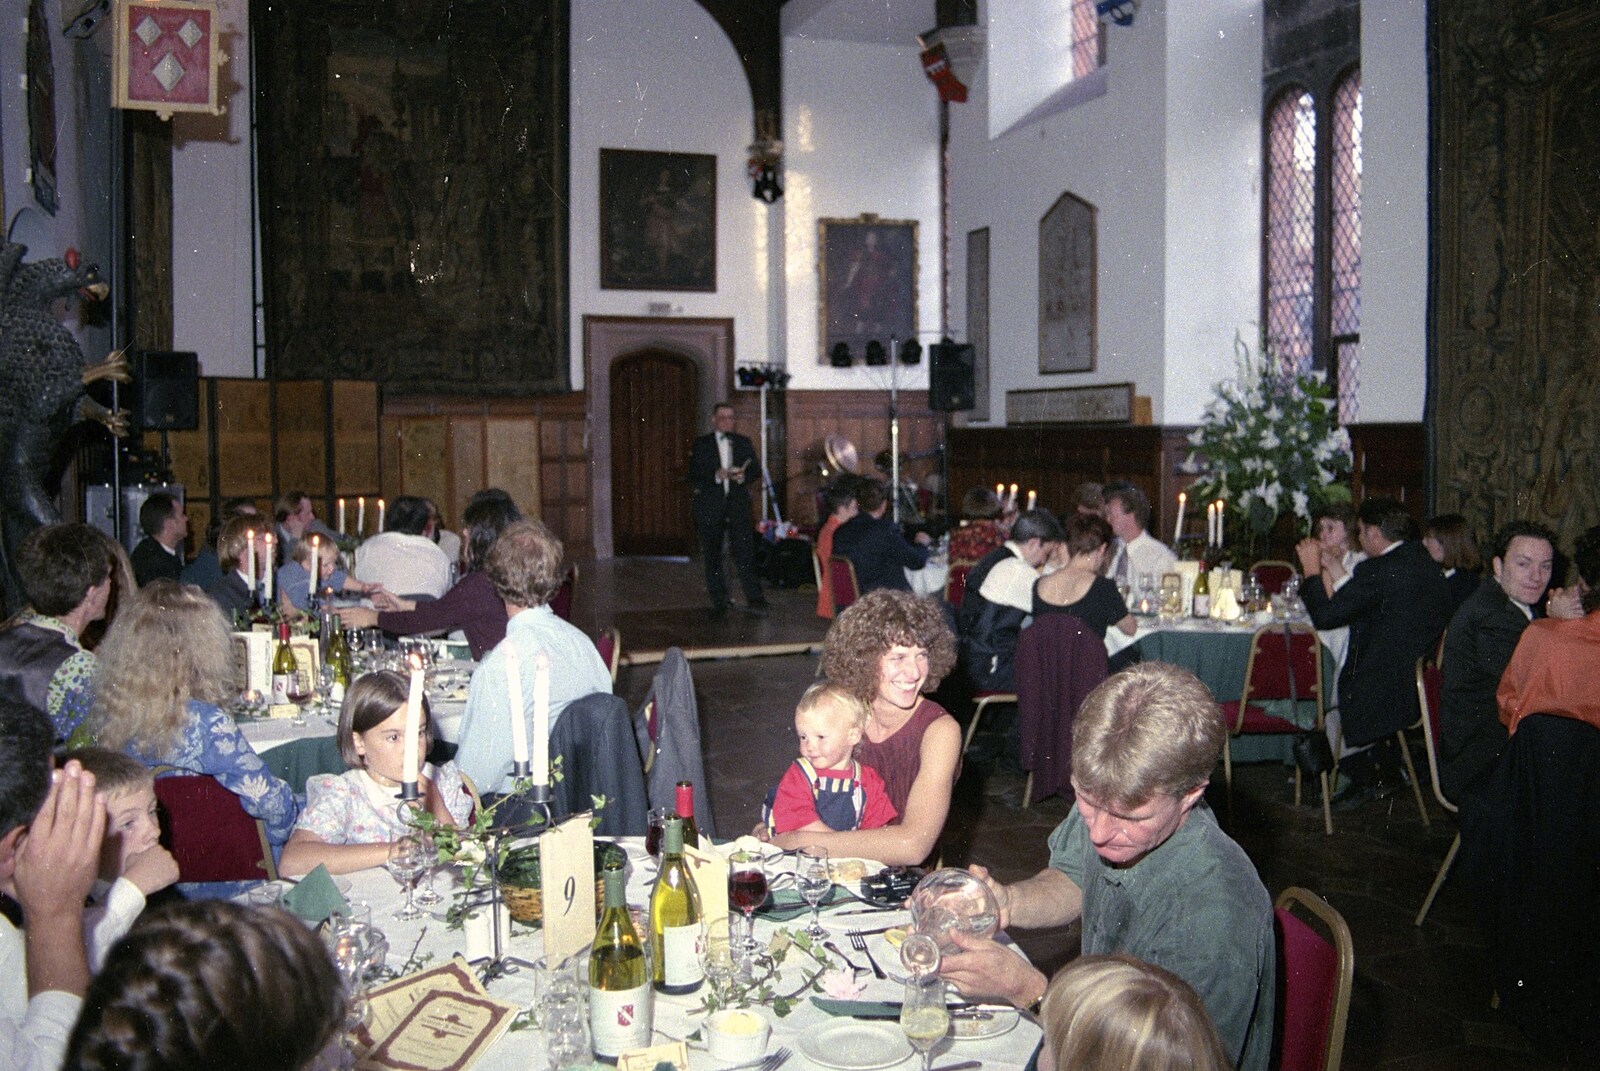 Time for lunch from Stuart and Sarah's CISU Wedding, Naworth Castle, Brampton, Cumbria - 21st September 1996